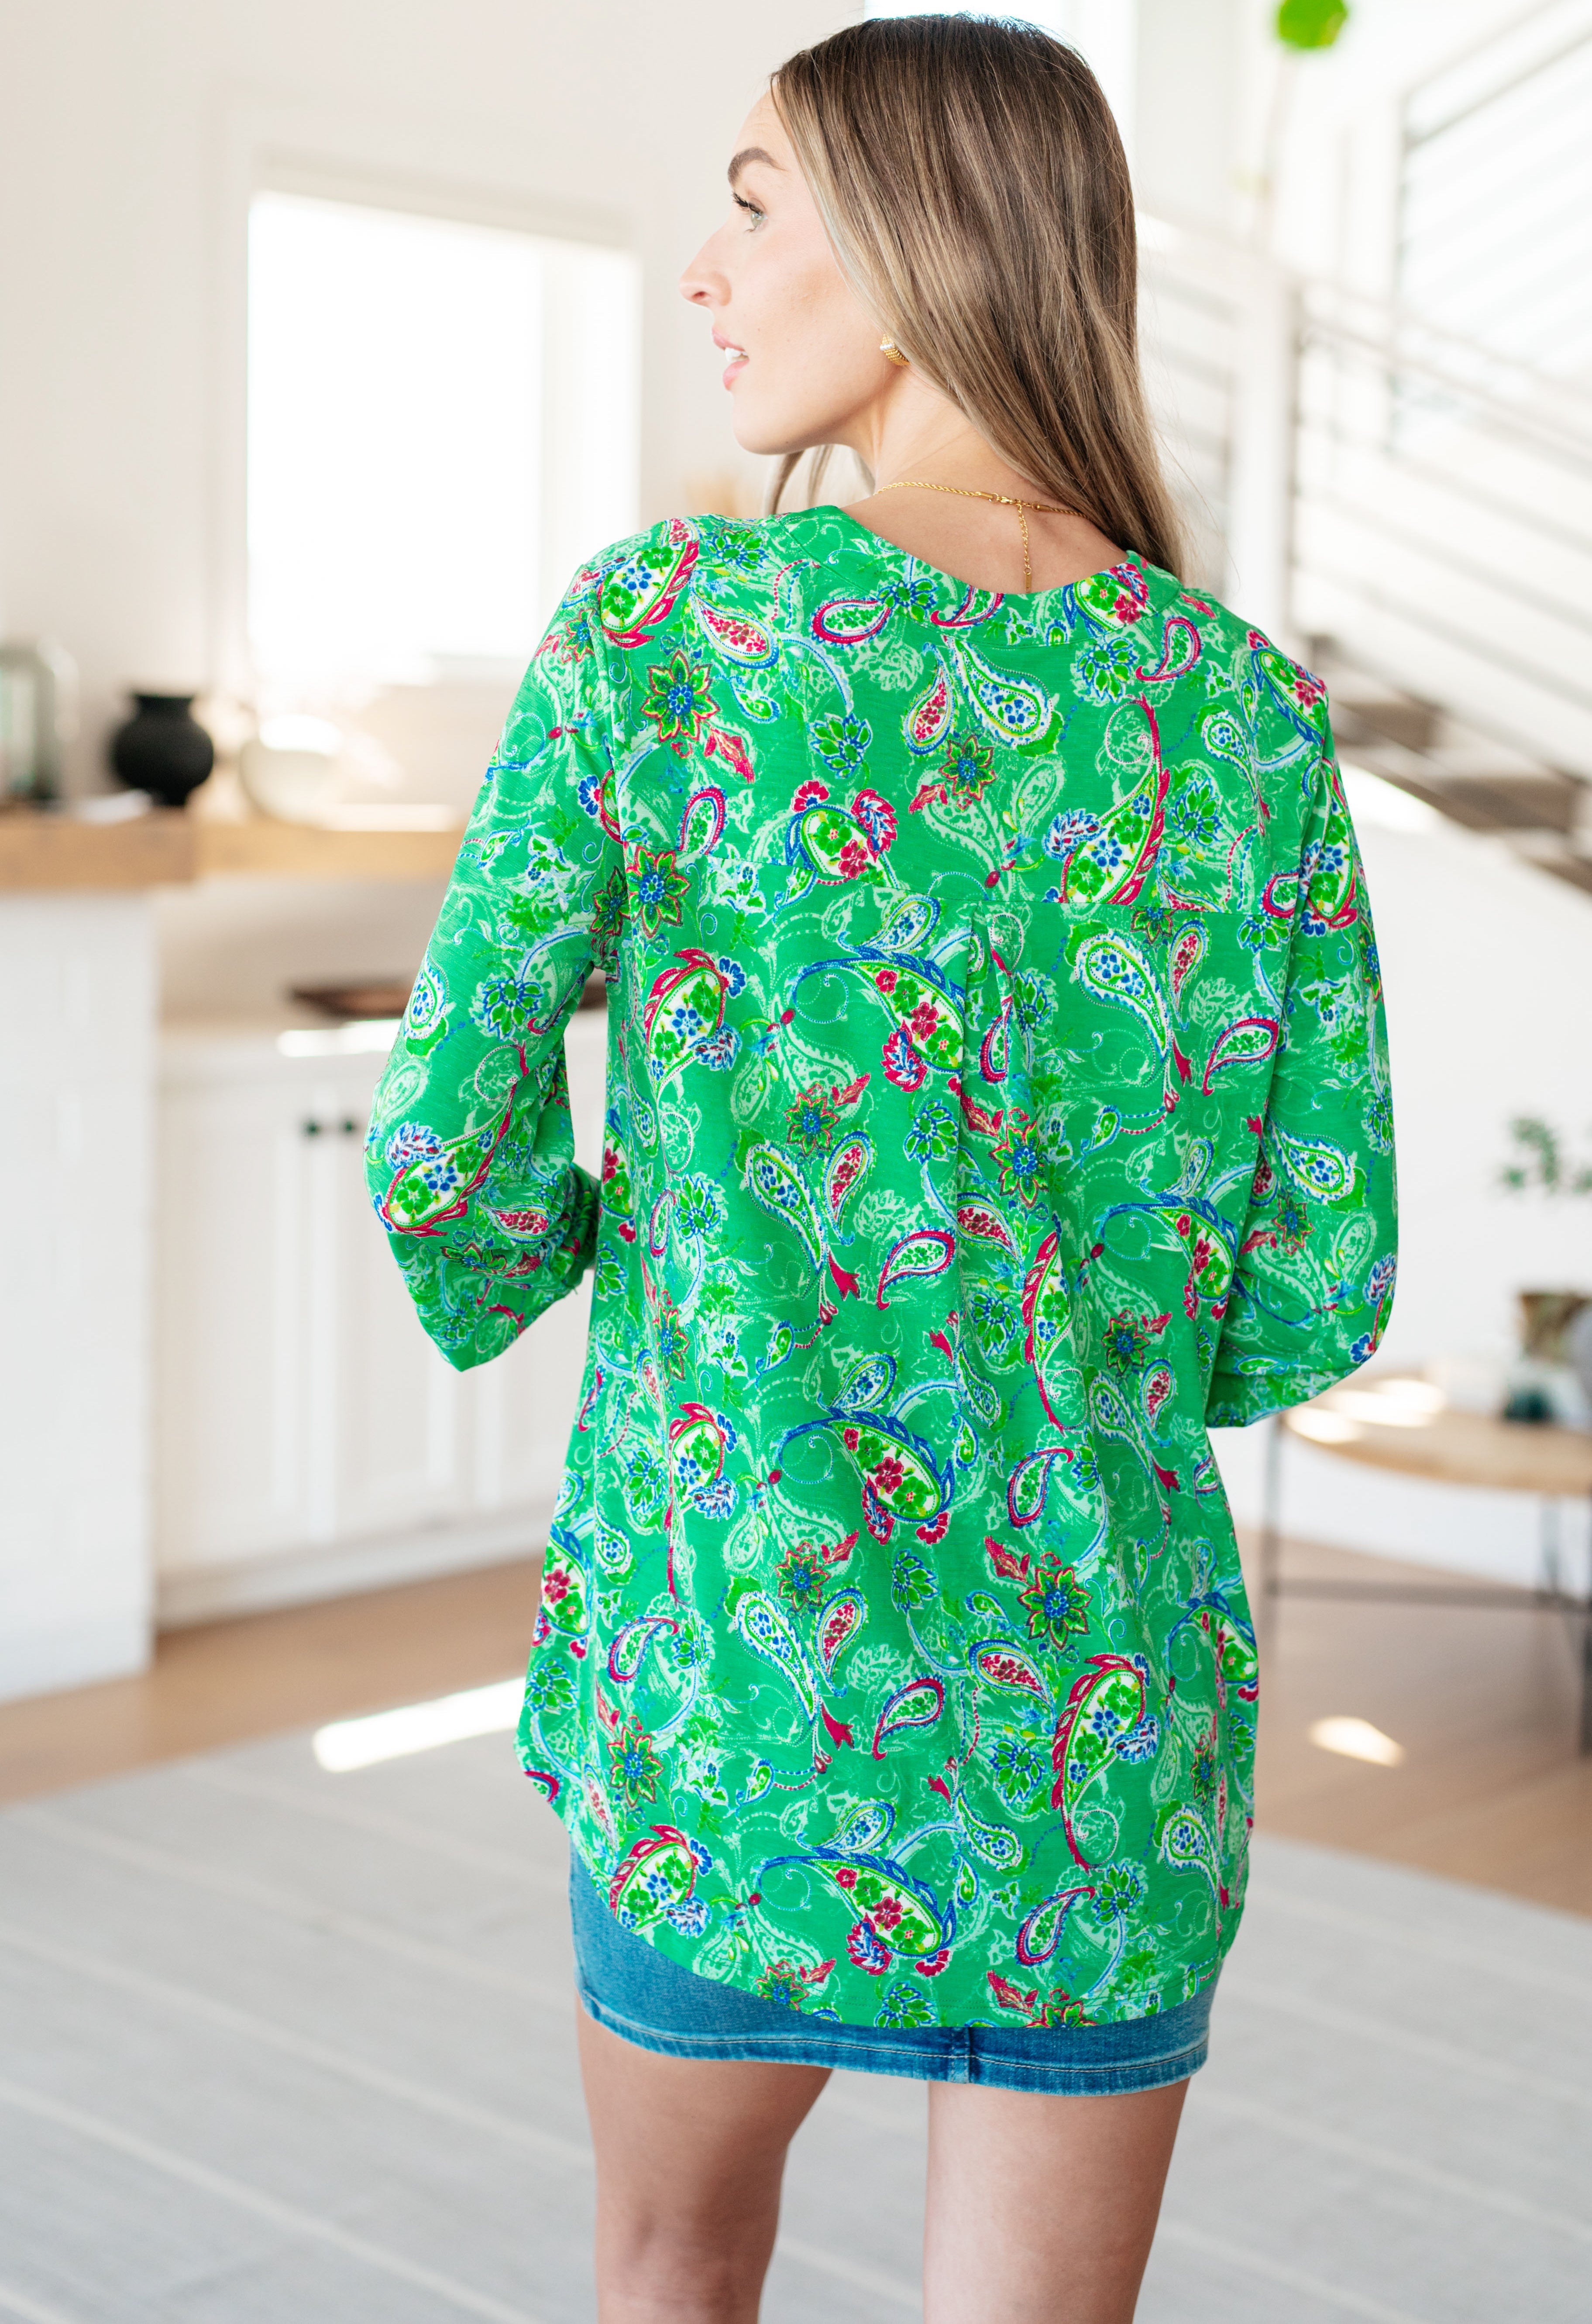 Lizzy Top in Emerald and Magenta Paisley Tops Ave Shops   